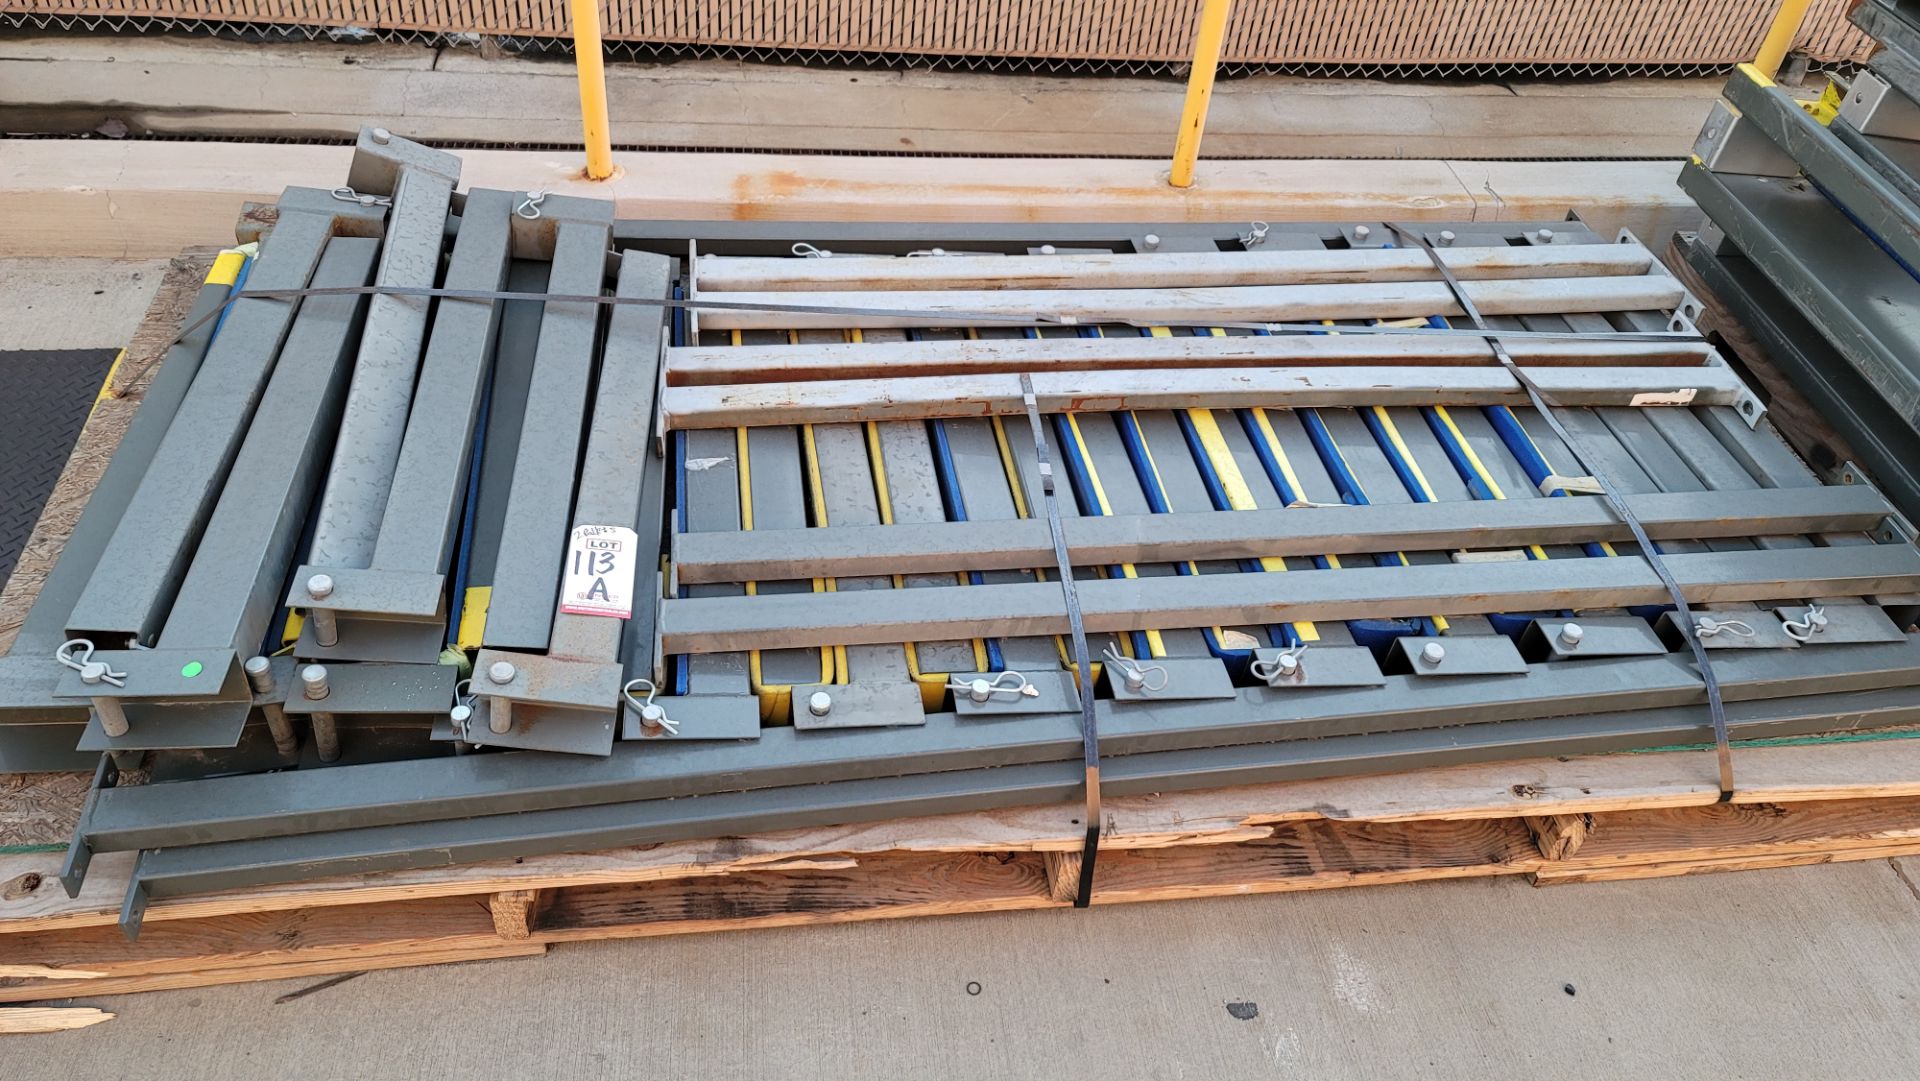 LOT - CANTILEVER MATERIAL RACK, DISASSEMBLED & BANDED ON (2) PALLETS, 8' UPRIGHTS, 36" ARMS ( - Image 2 of 3